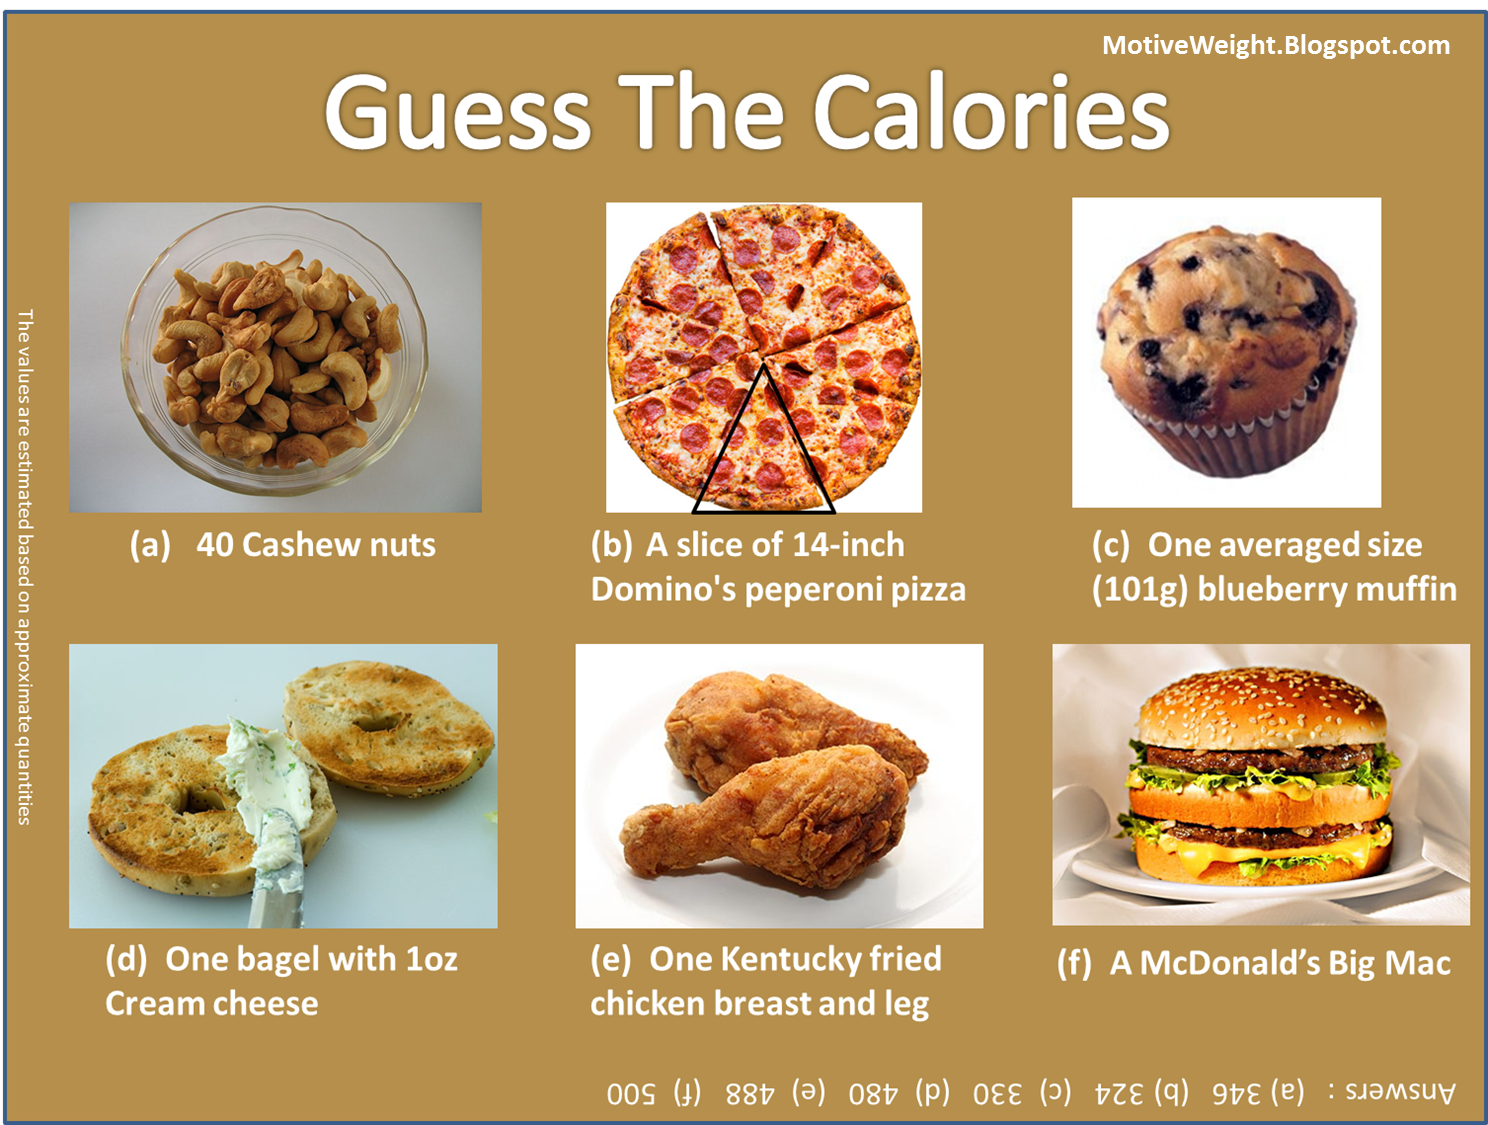 Motiveweight Guess The Calories